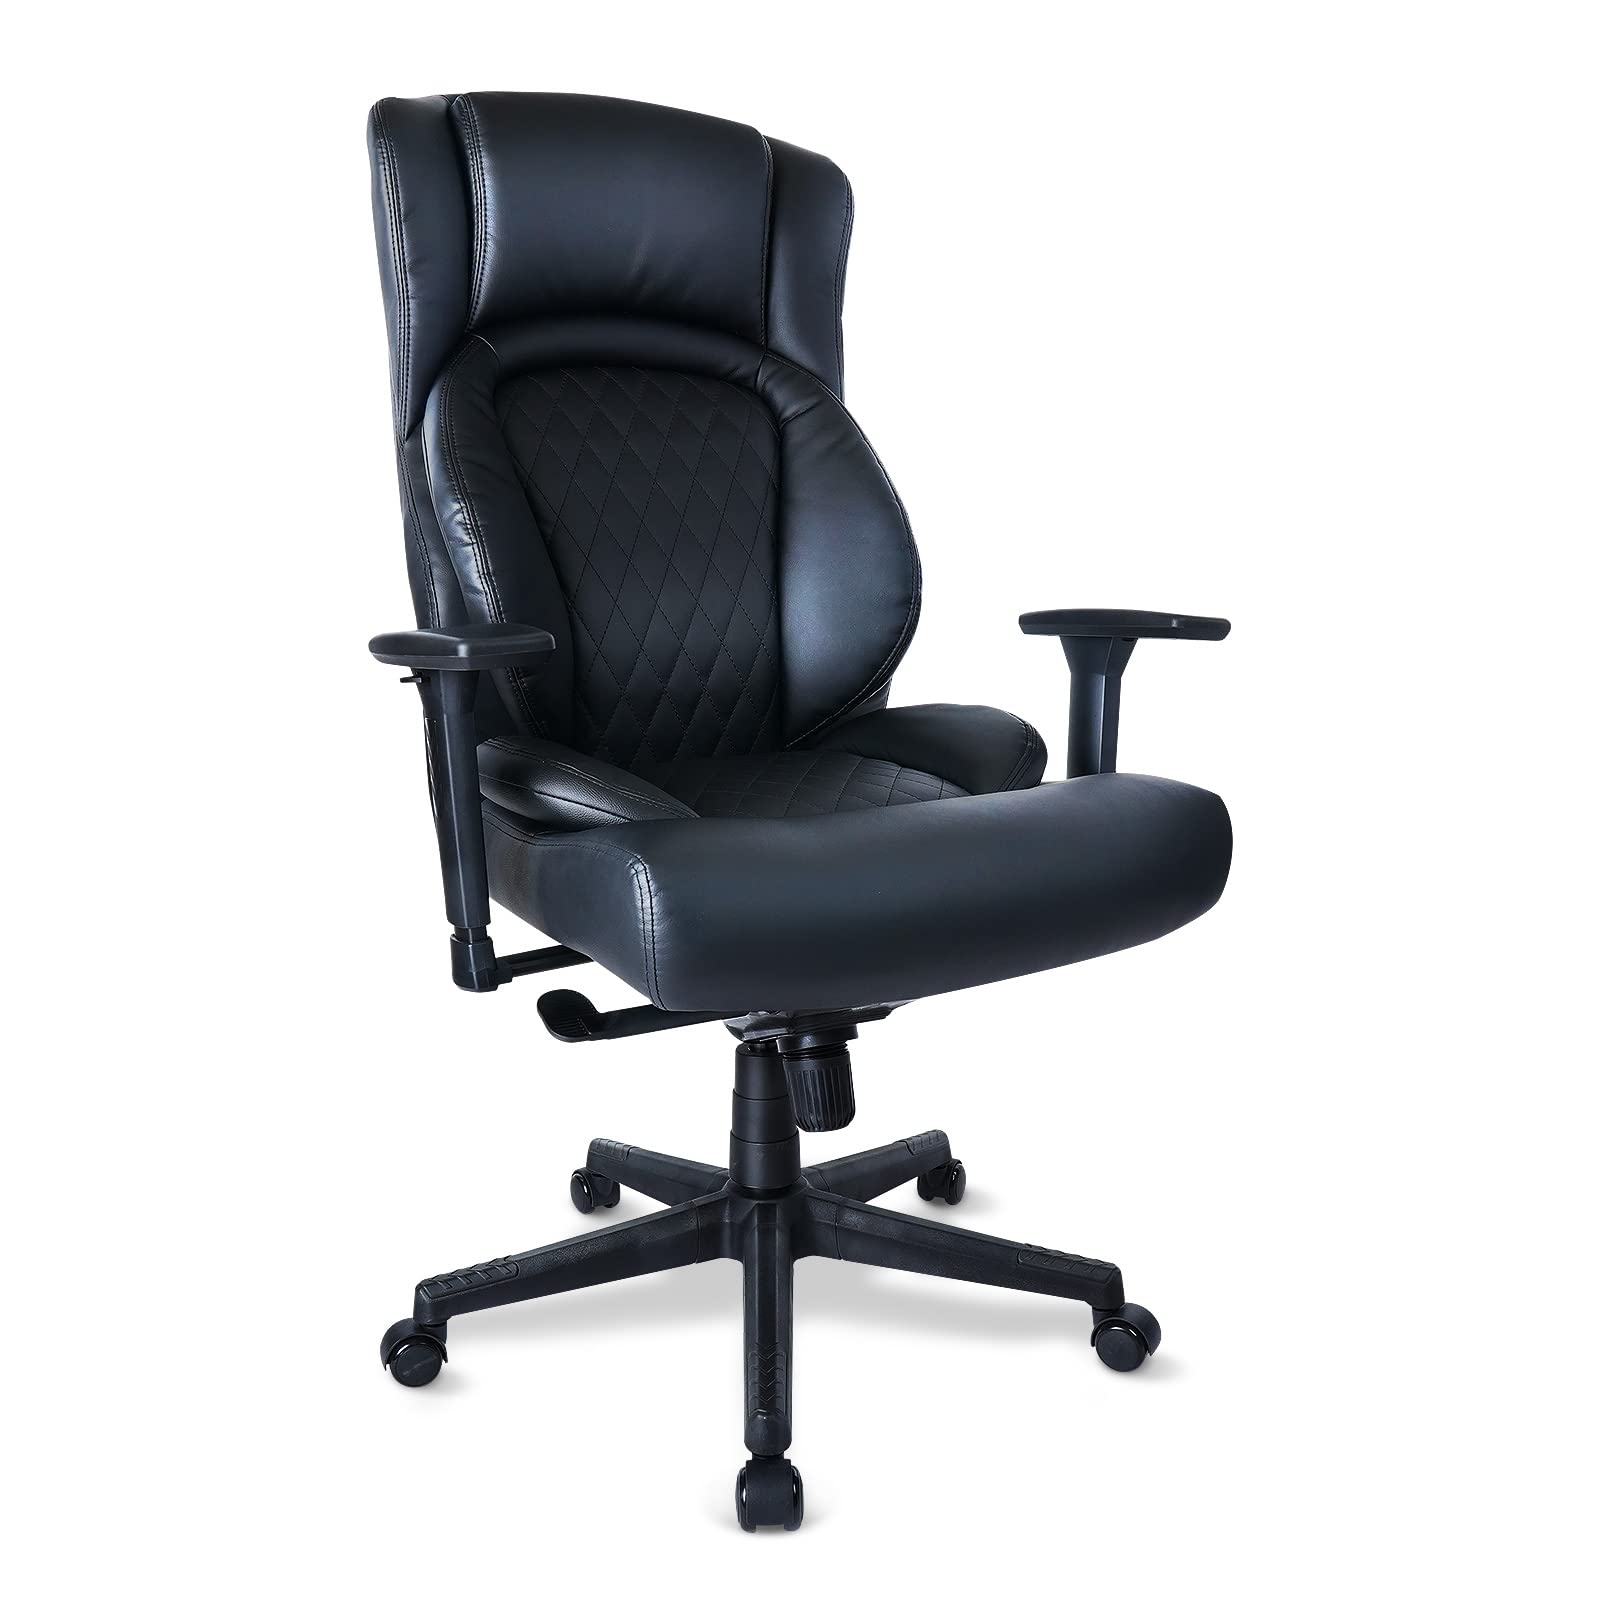 Big and Tall Office Chair 400lbs-Heavy Duty Executive Desk Chair with Extra Wide Seat, High Back Ergonomic Leather Computer Chair with Tilt Rock